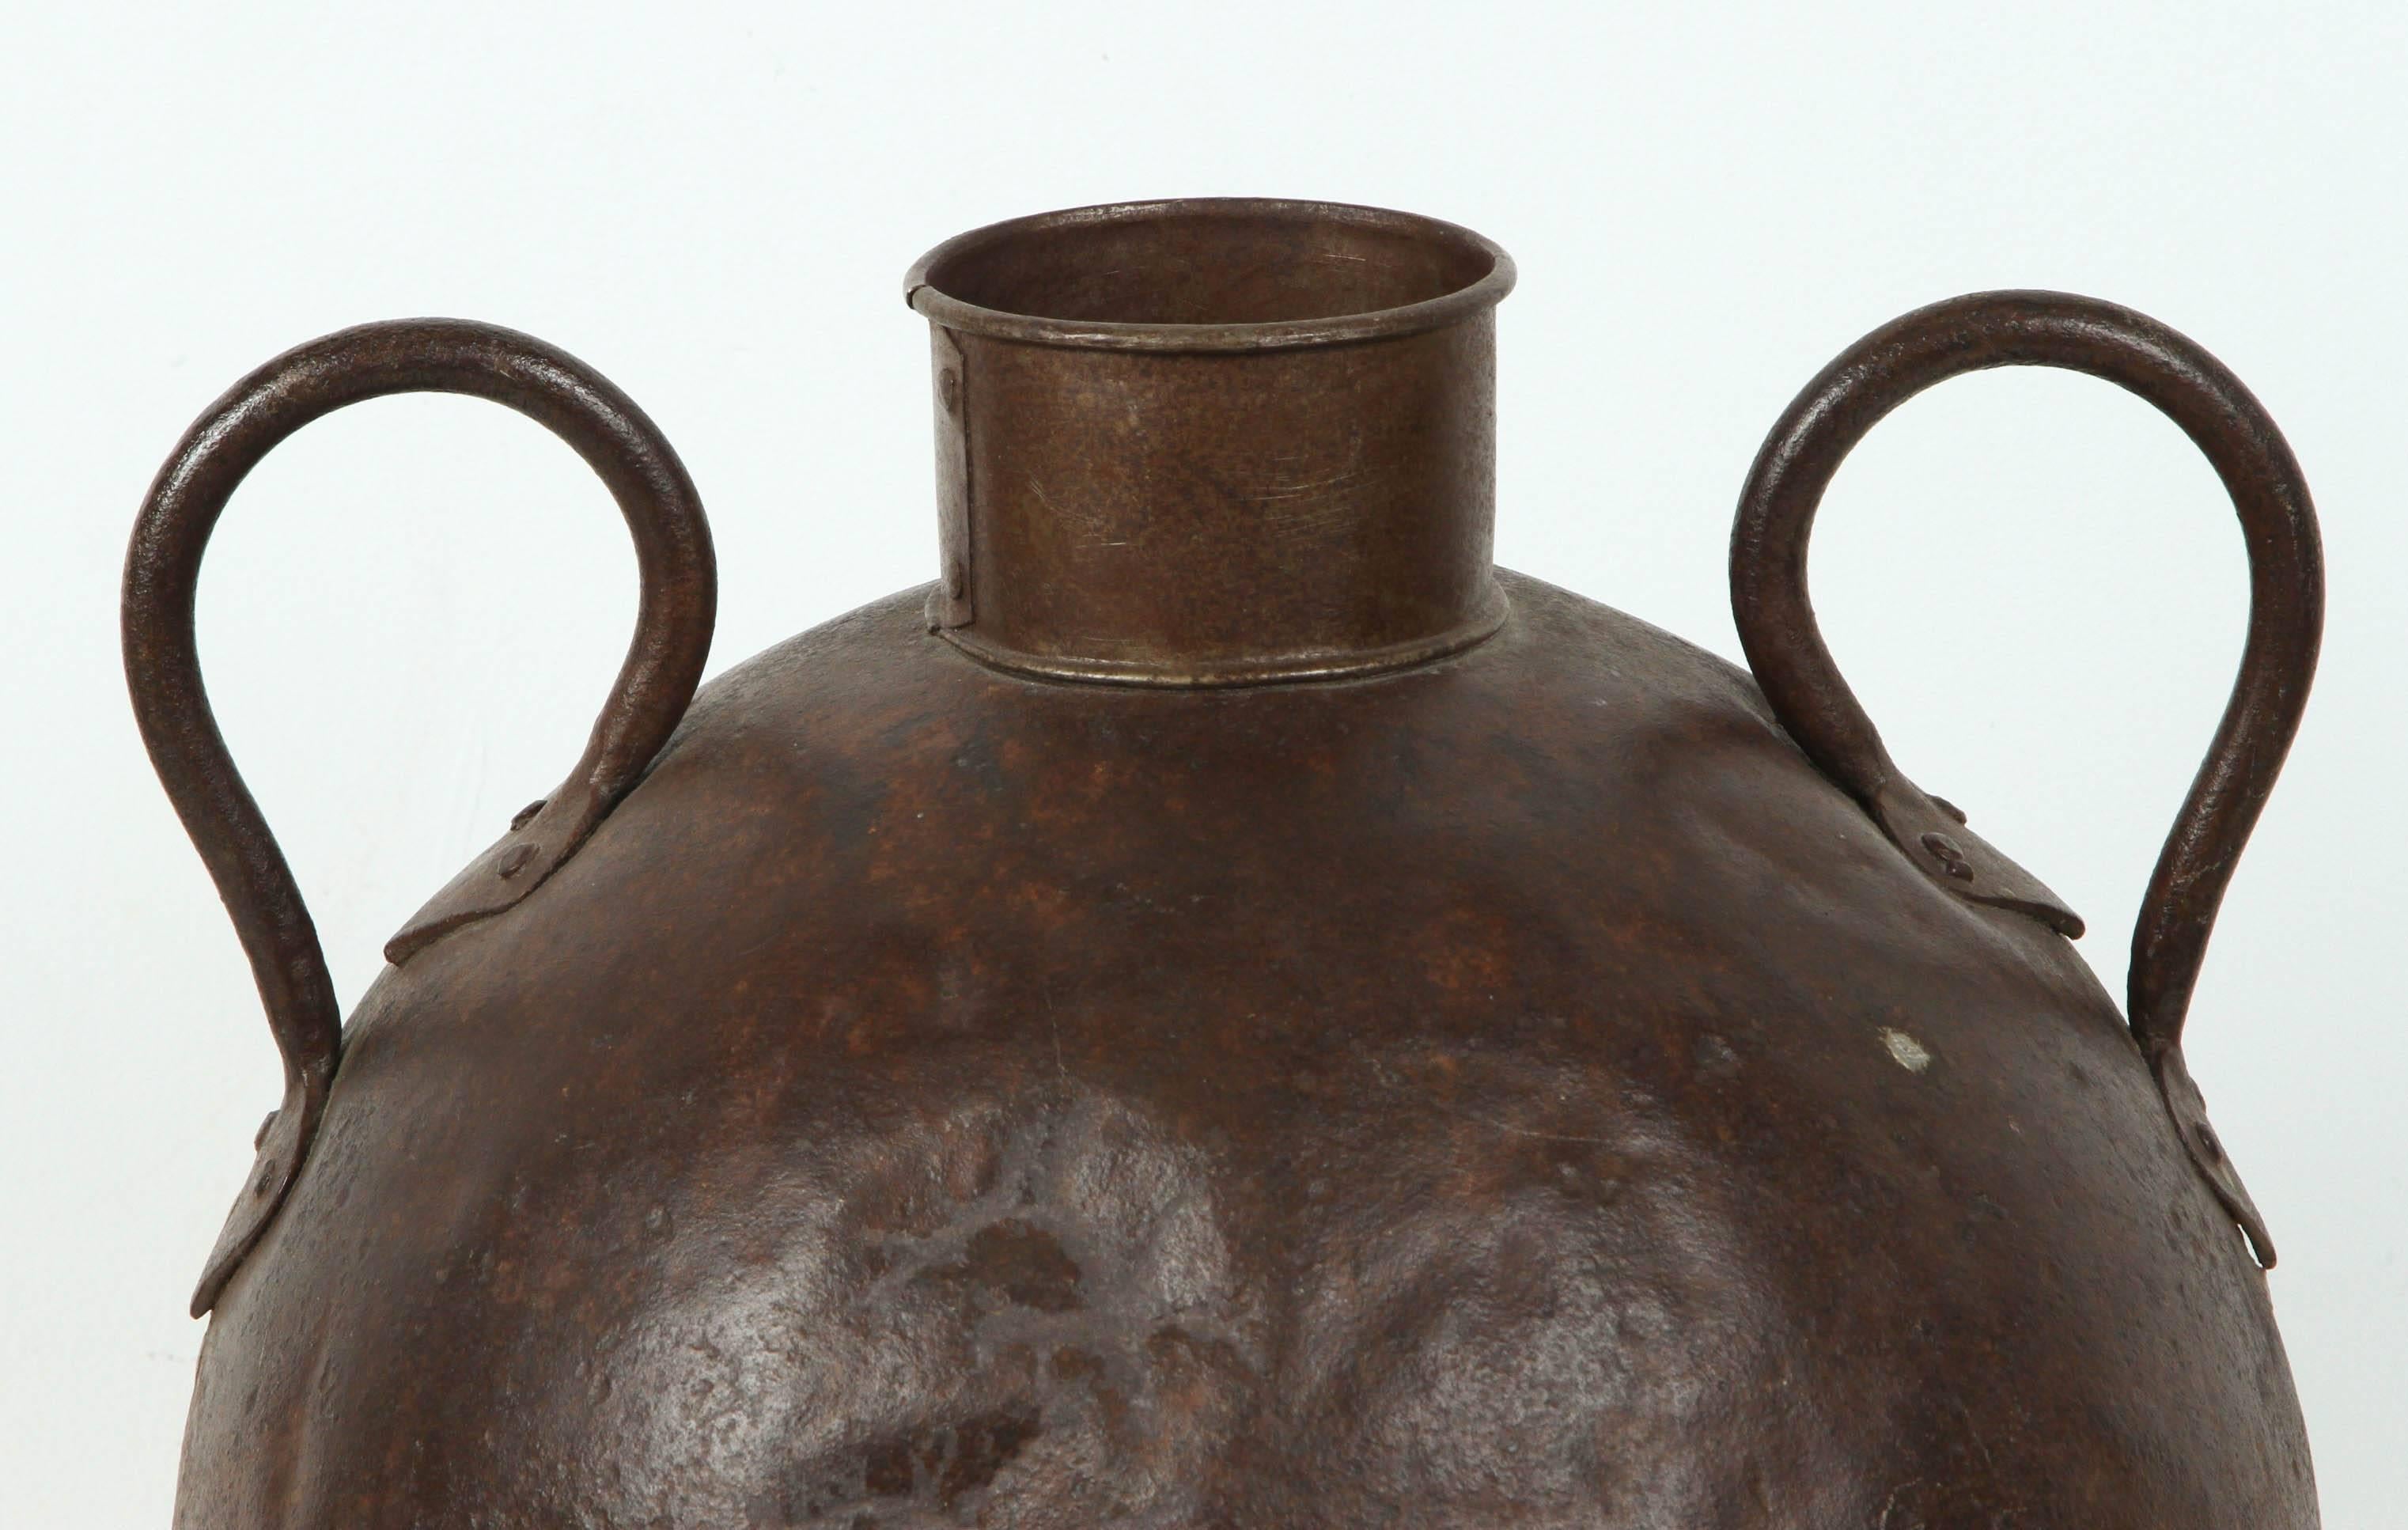 19th Century Antique Metal Water Jar with Handles